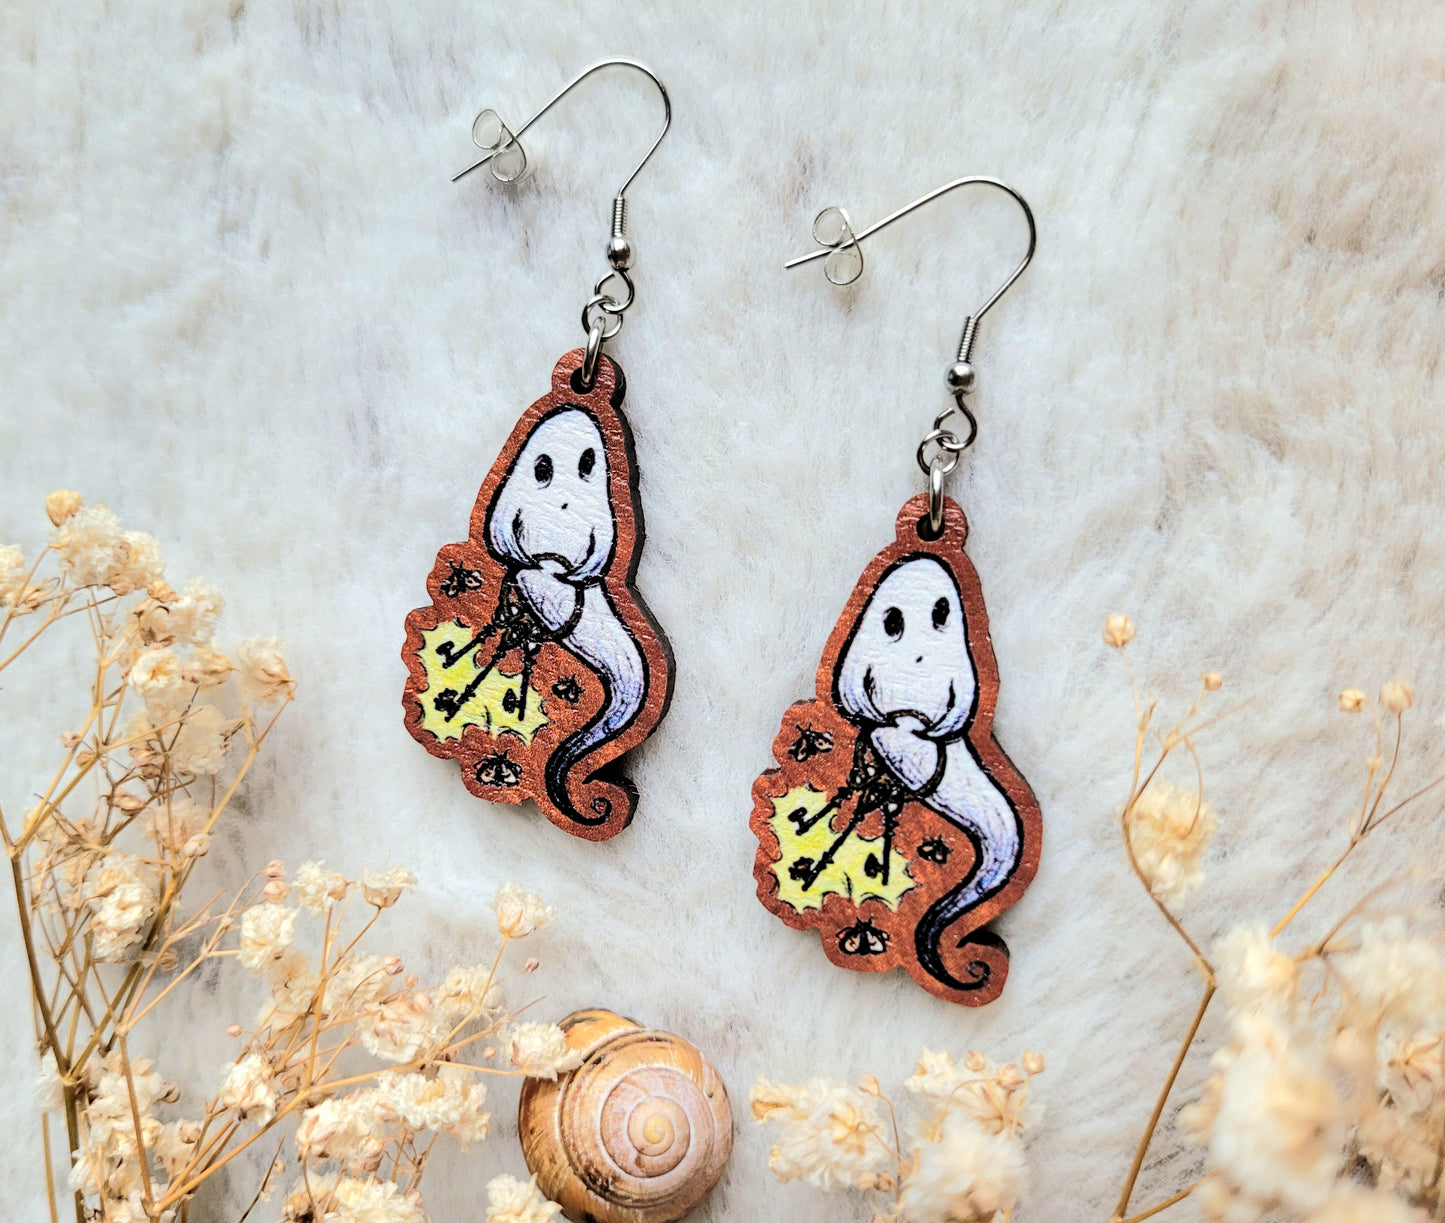 Ghostie illustrated earrings, responsibly sourced cherry wood, 304 Stainless Steel hooks, by Grace Moth